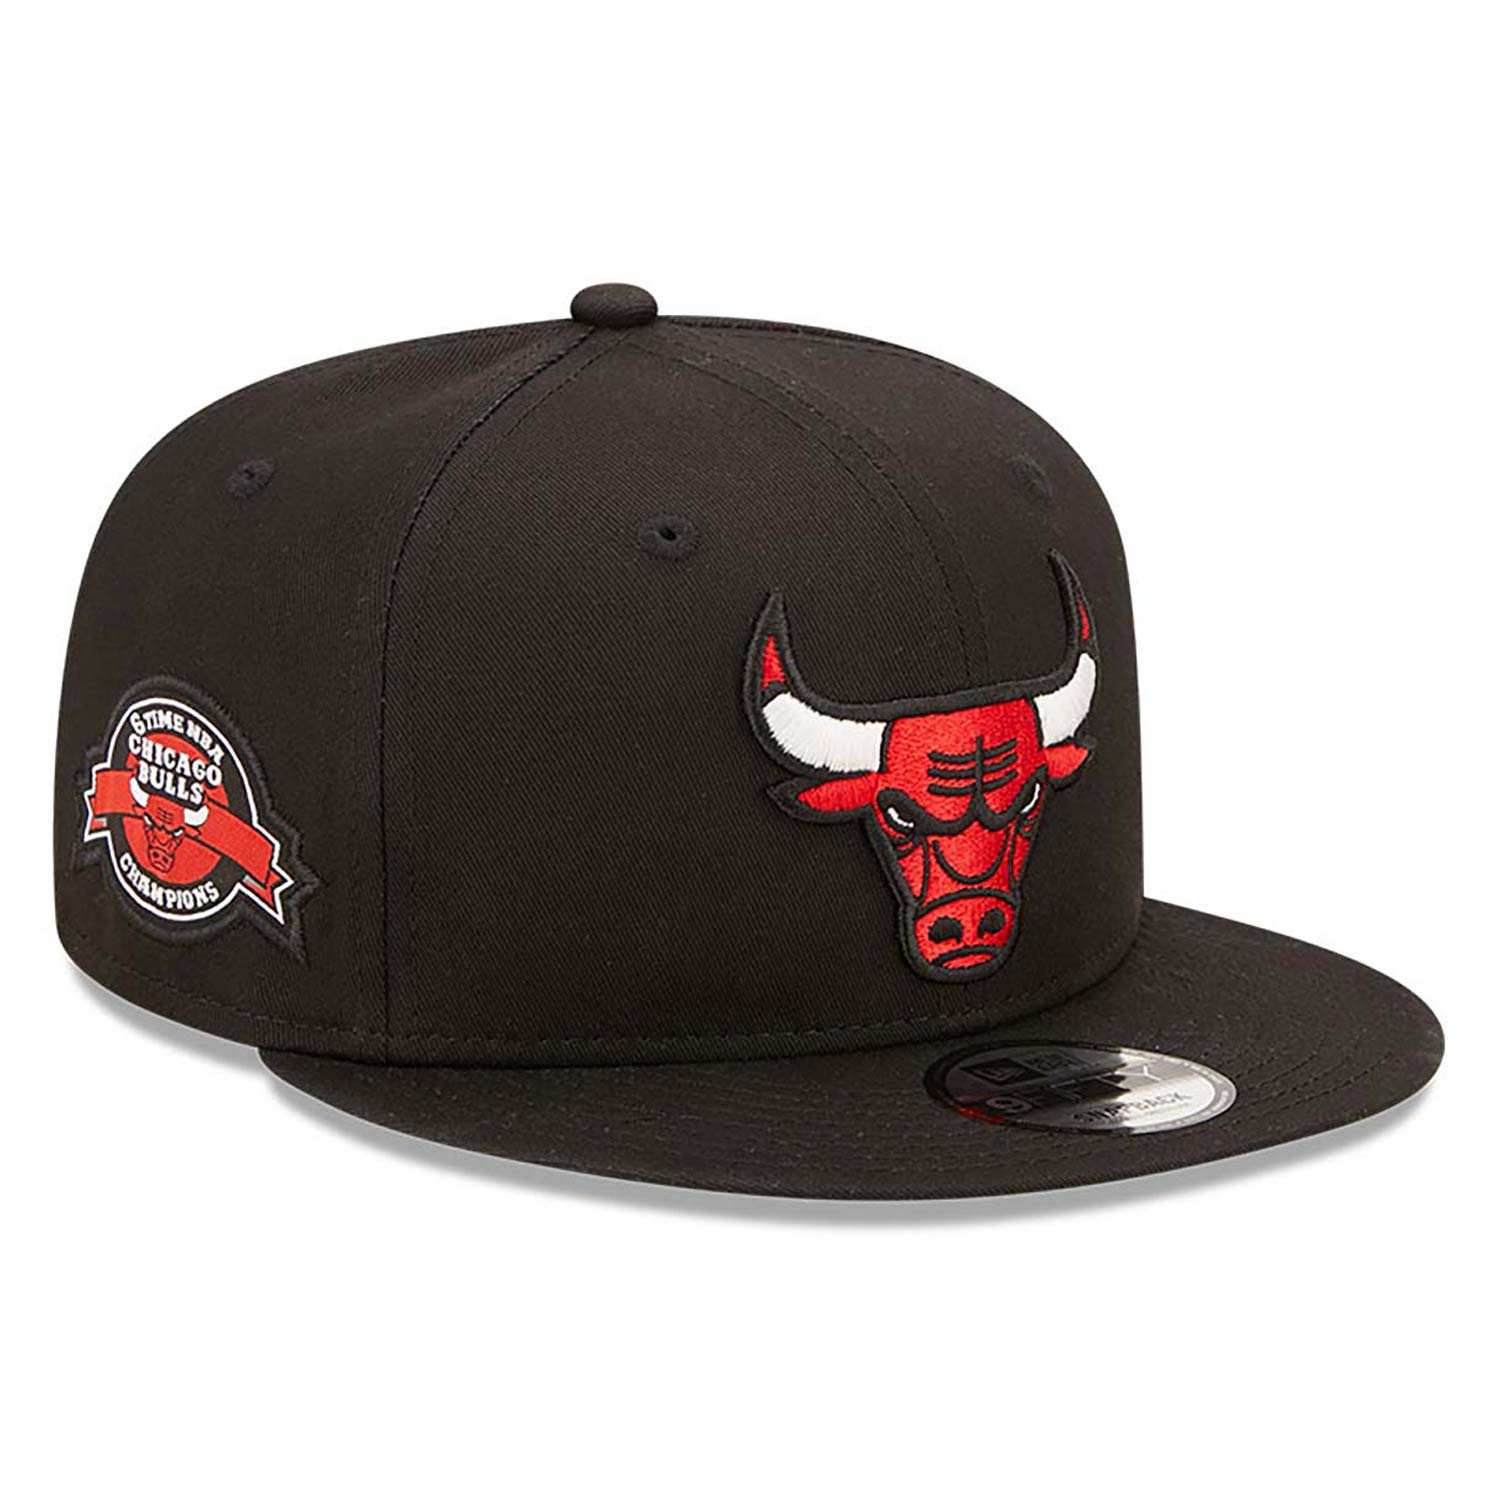 Official New Era Team Side Patch Chicago Bulls 9FIFTY Cap C2_542 | New ...